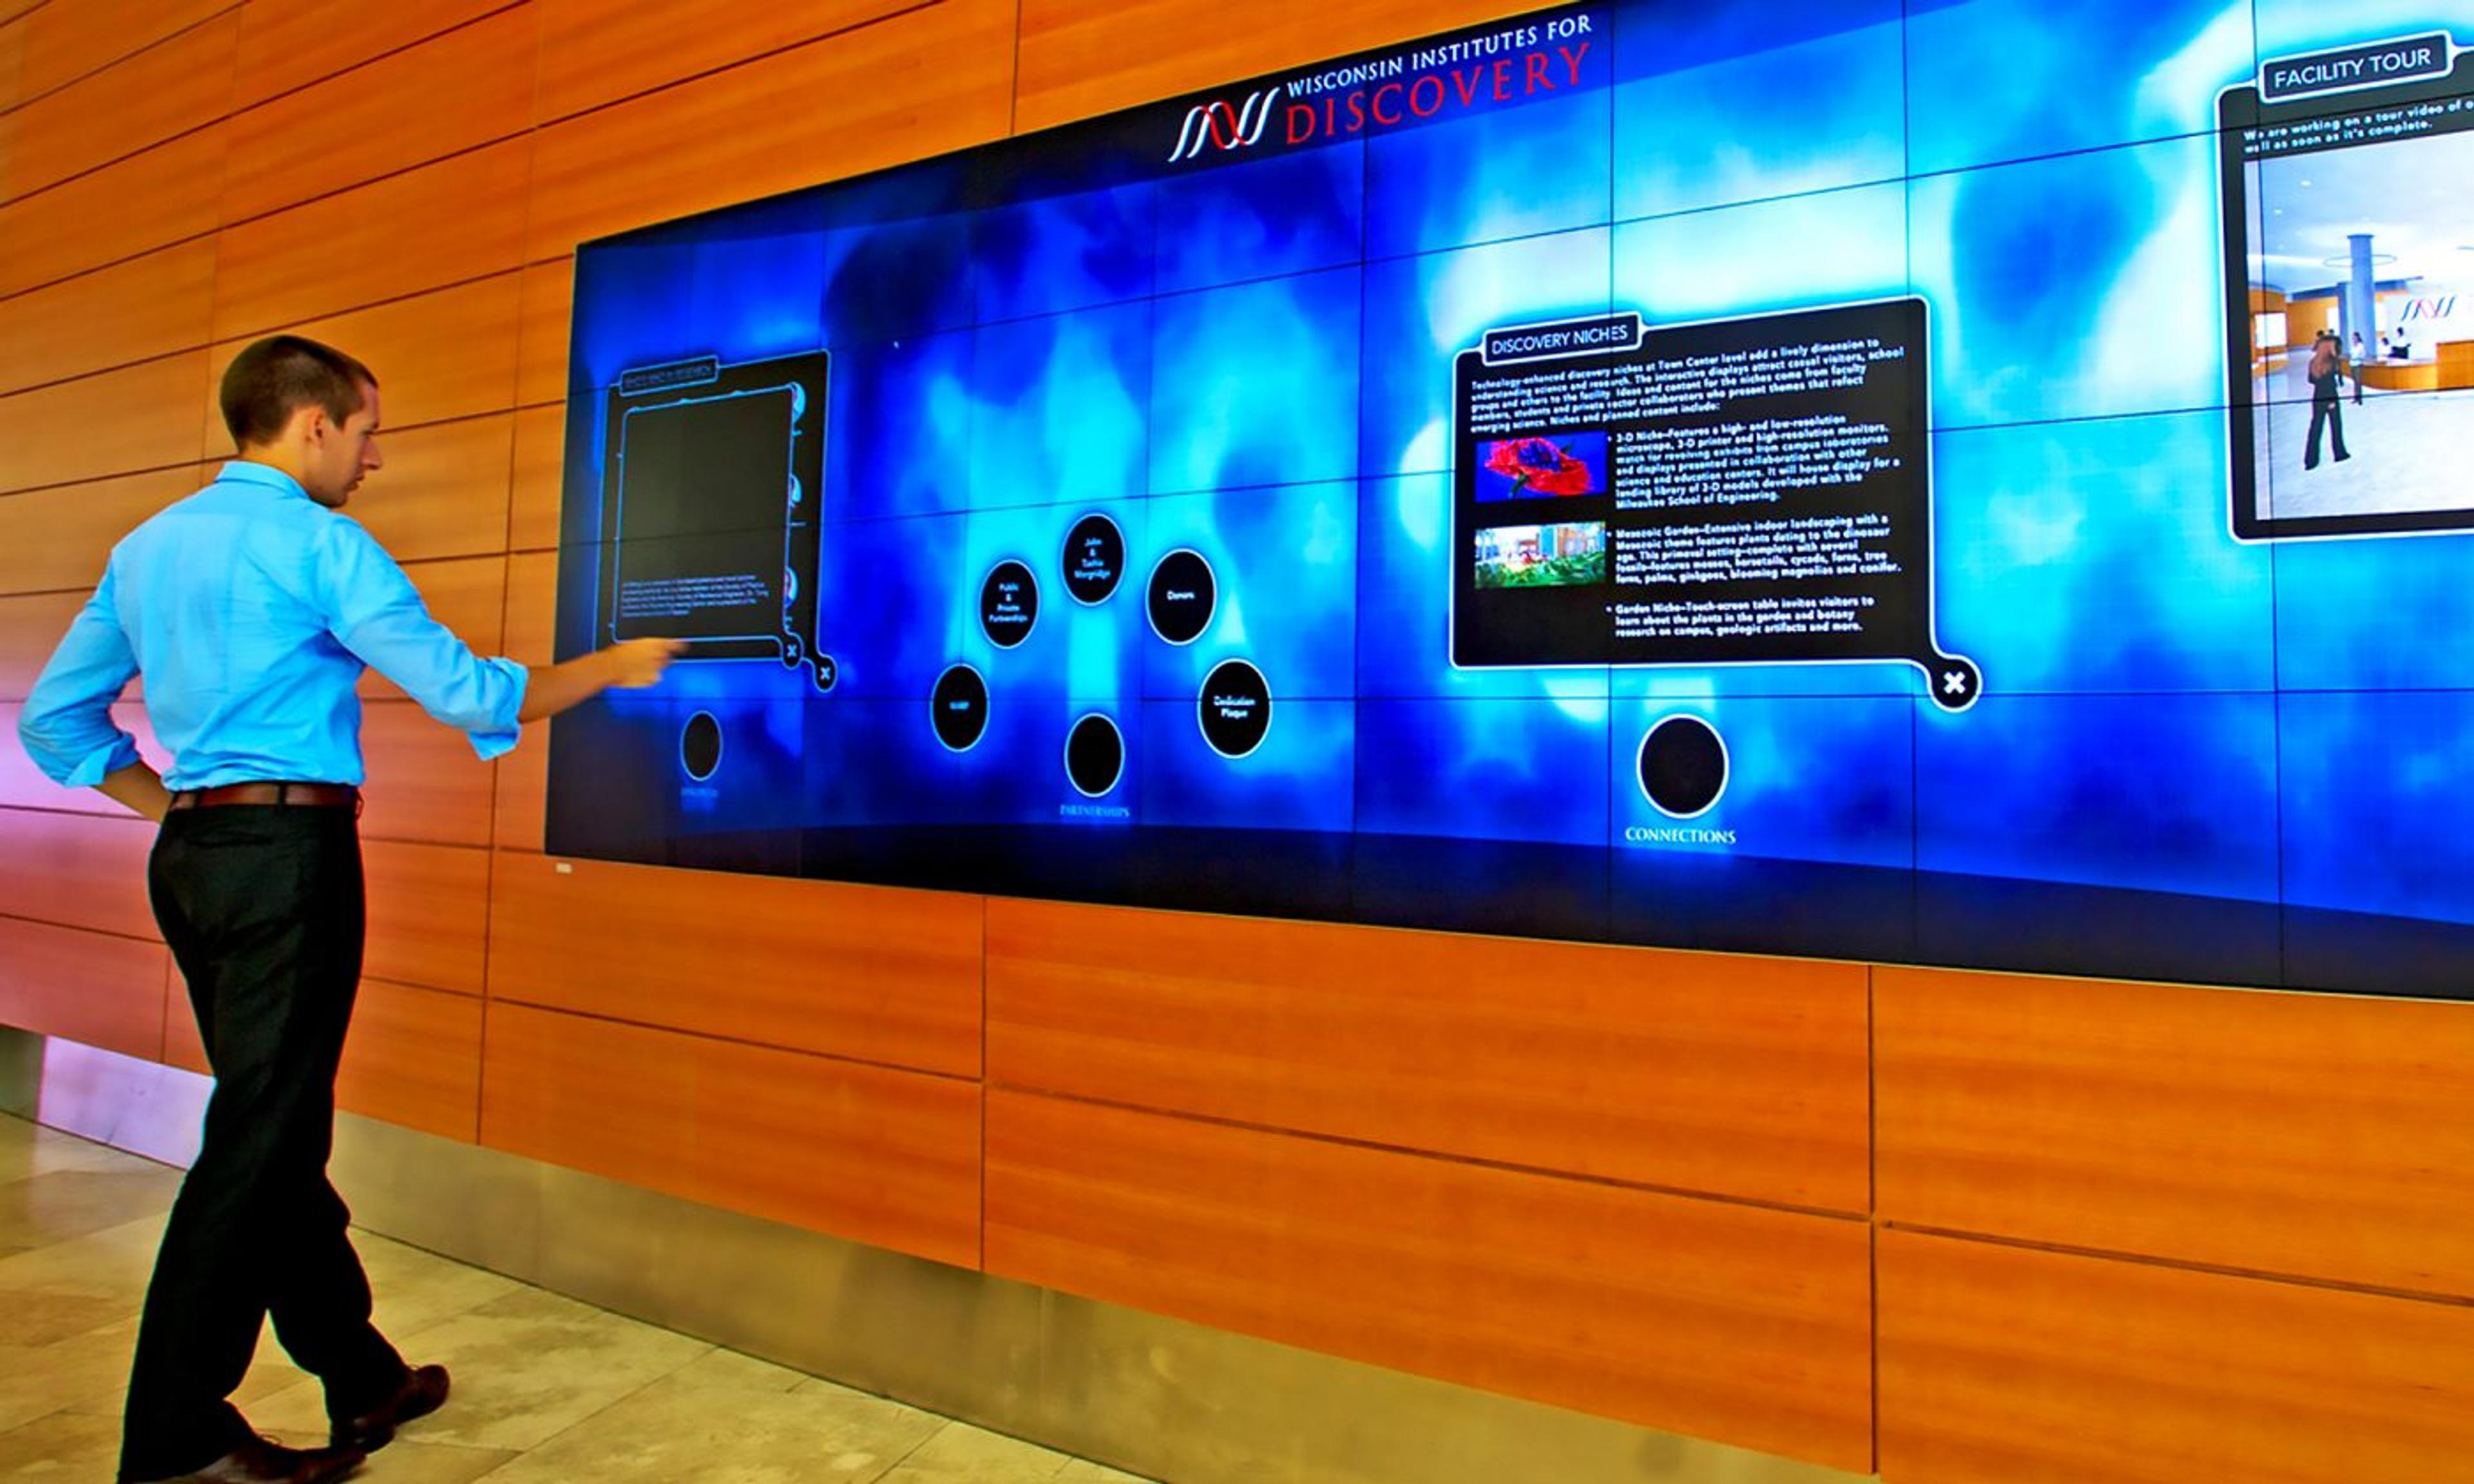 Wisconsin Institute For Discovery Digital Wall